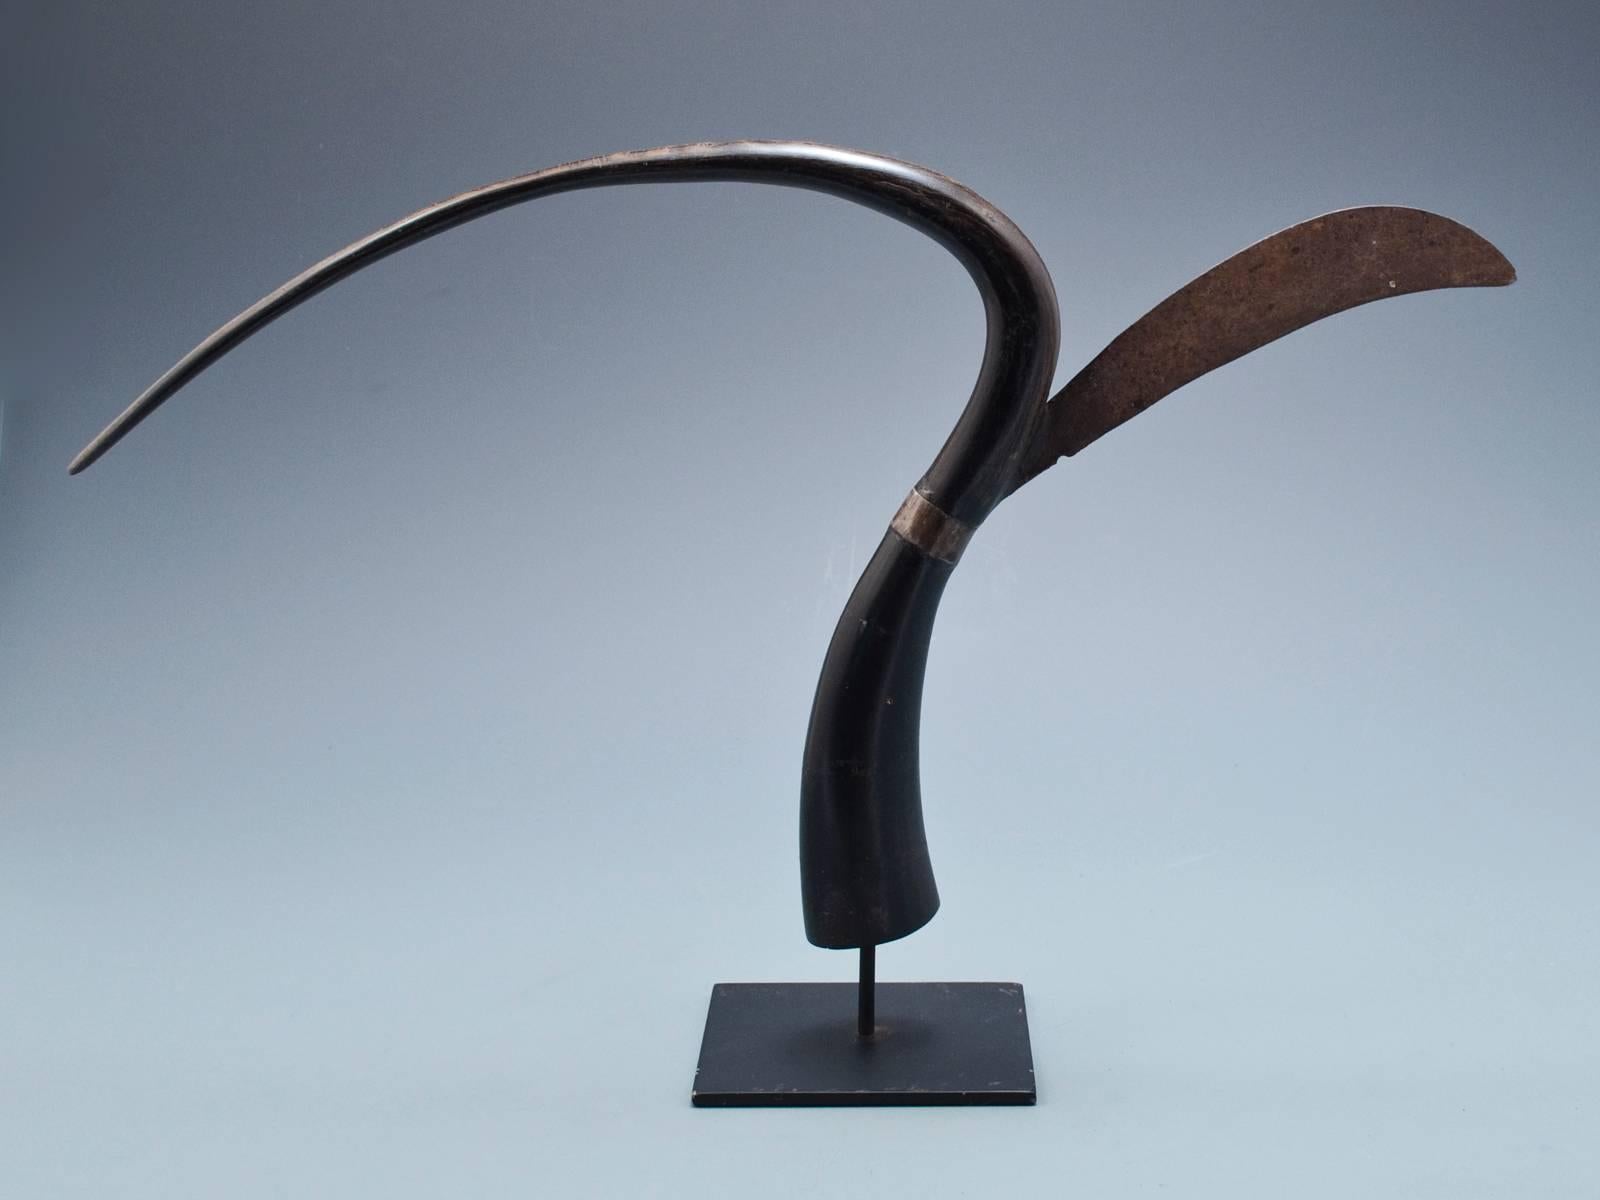 Mid-20th century Rice Cutter from the Khmer people of Cambodia.
The gracefully curved part of the ox Horn was used to gather a handful of rice plants and then with a skillful turn of the wrist the sheaf was cut with the iron blade.